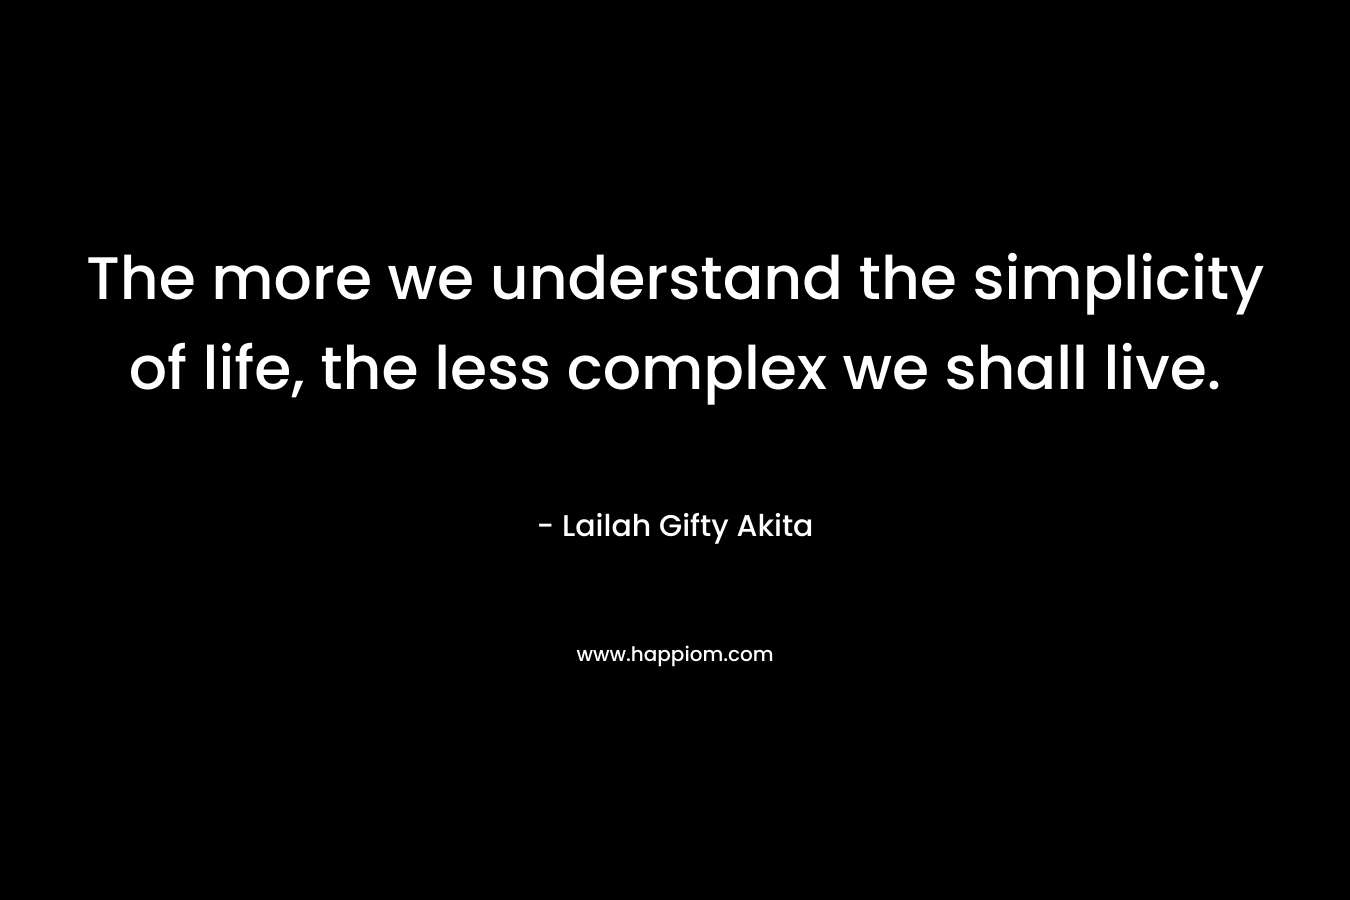 The more we understand the simplicity of life, the less complex we shall live.